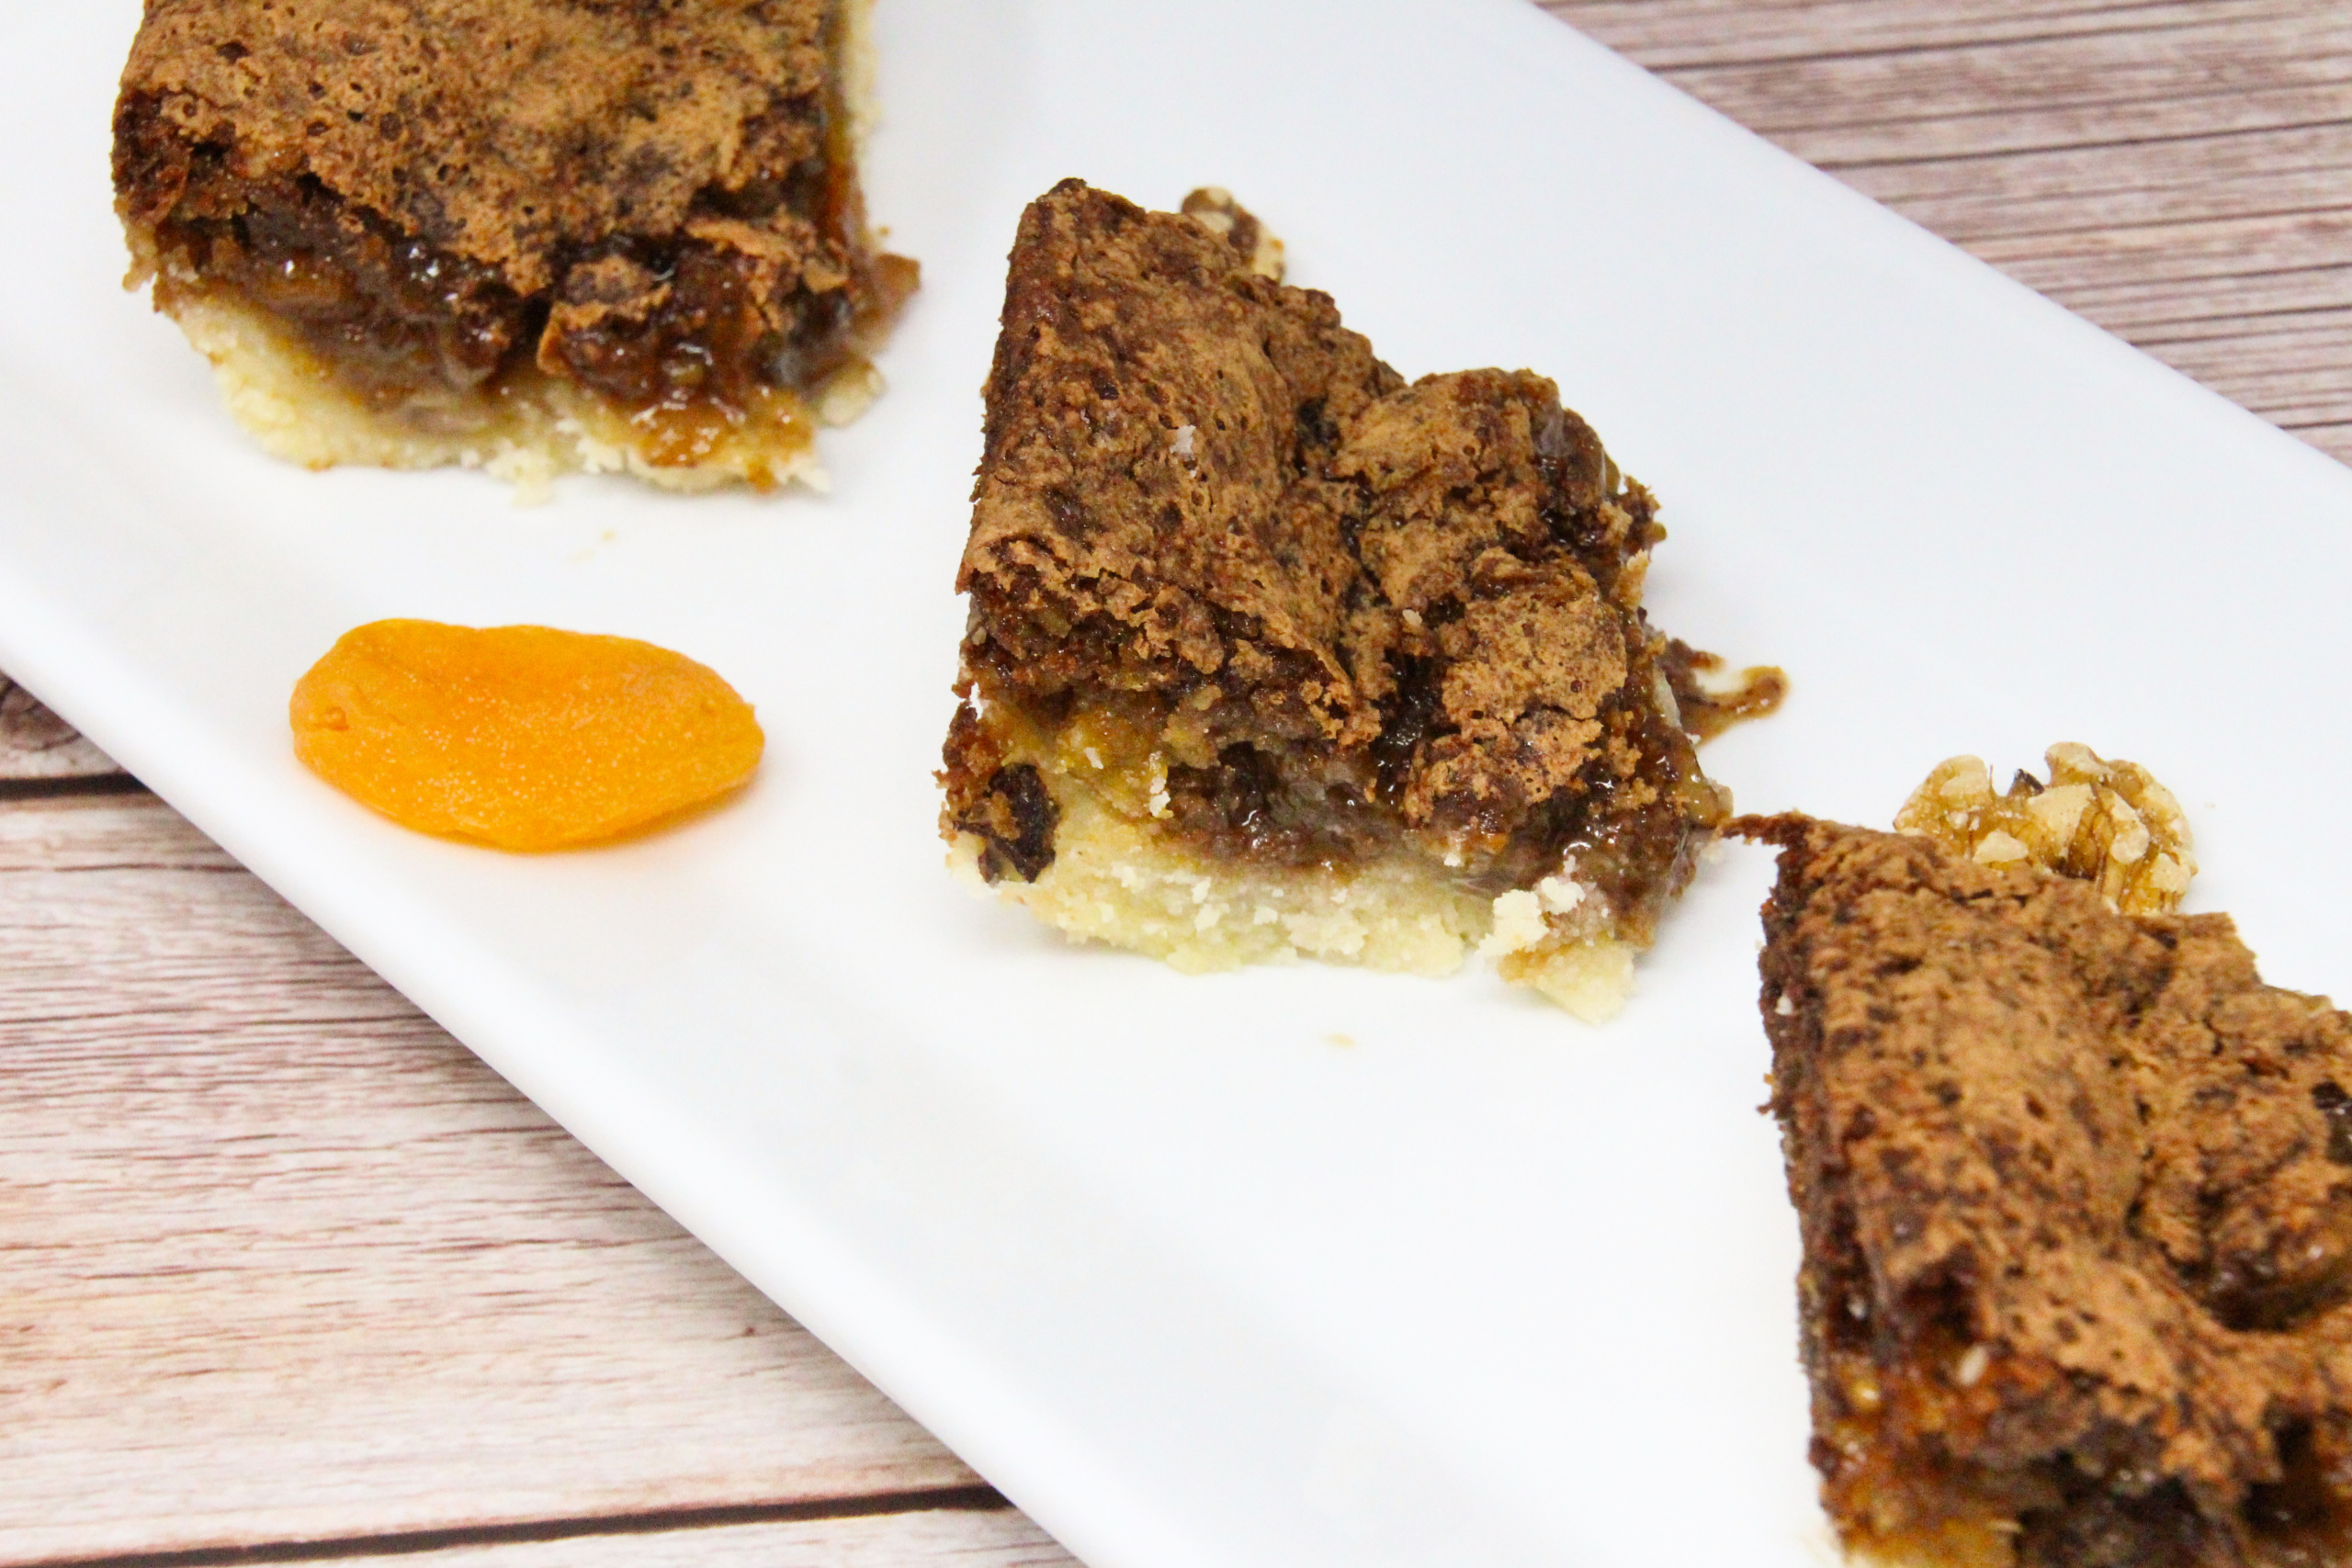 Apricot Squares start with a buttery base crust, and the filling is ooey-gooey and rich thanks to a generous portion of brown sugar, walnuts, and apricots. Recipe shared with permission granted by Barbara Ross, author of HIDDEN BENEATH. 